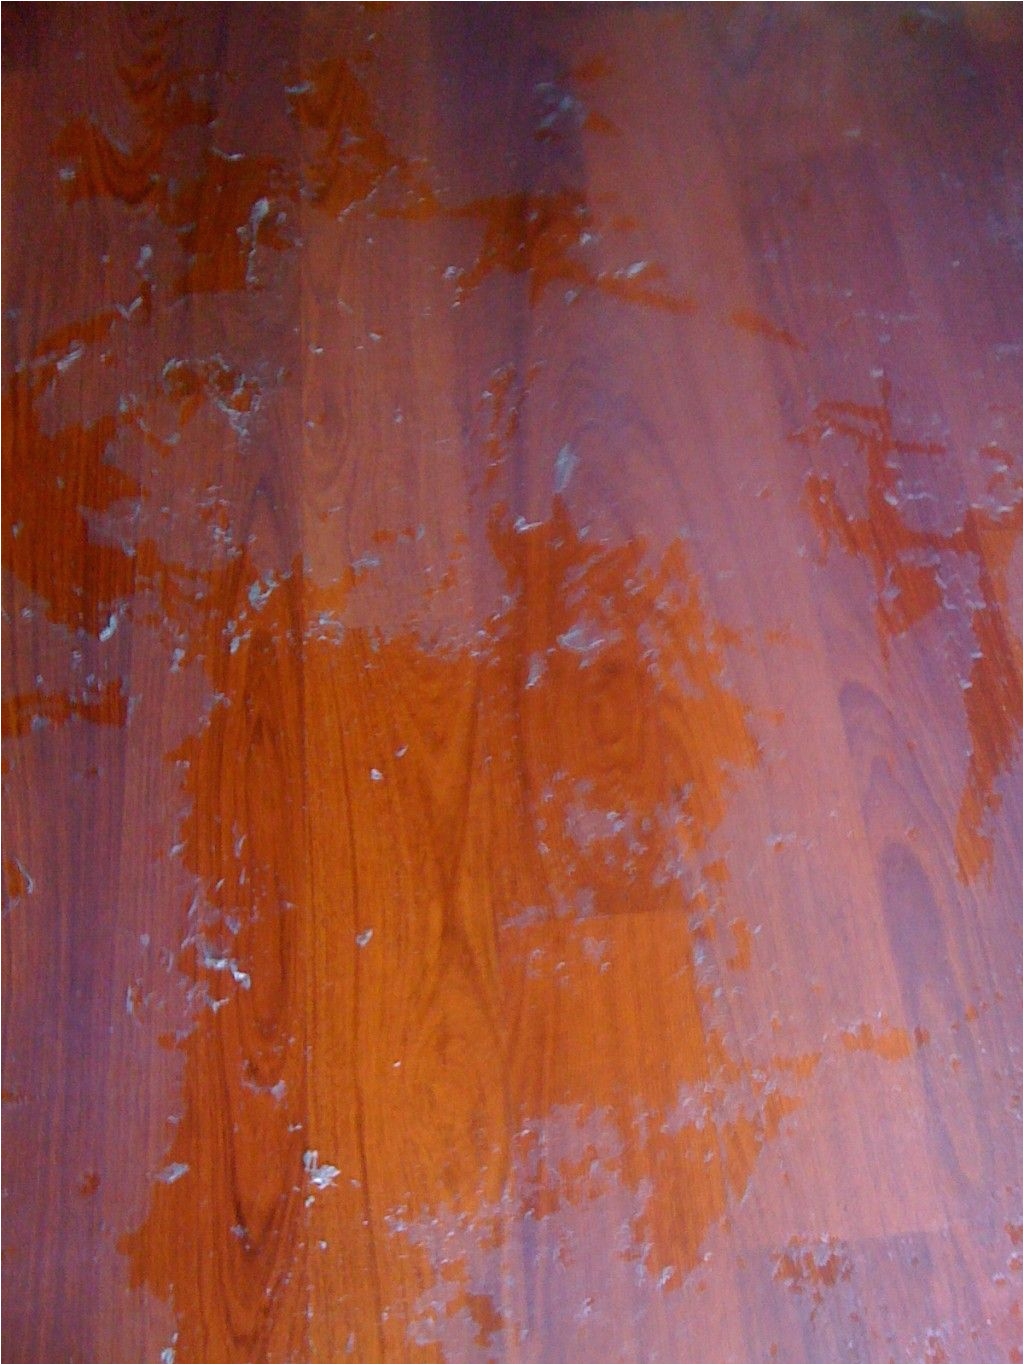 how to remove oily or wax build up from cleaning or polishing solutions from wood floors